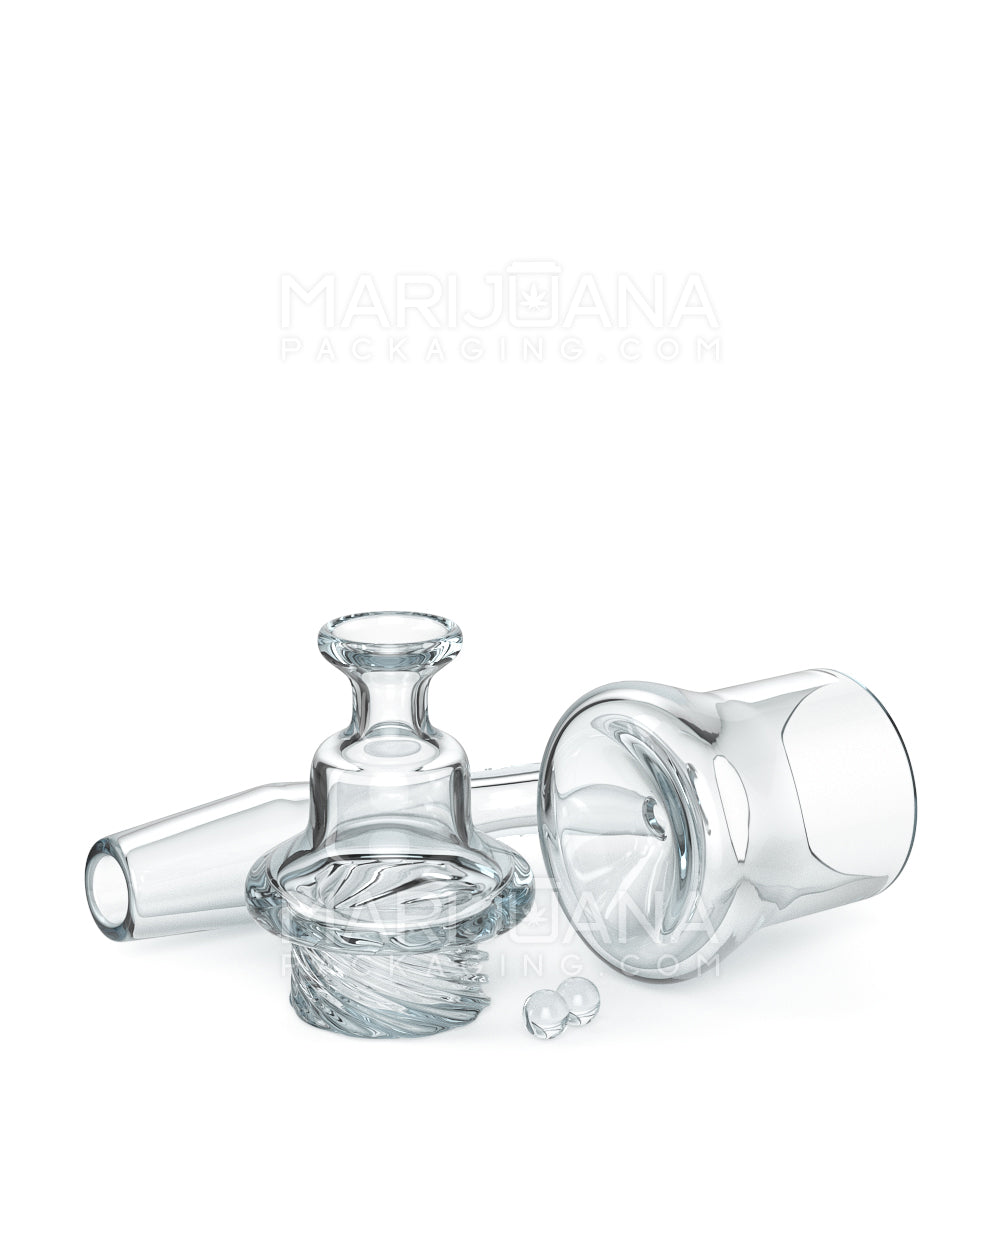 Thick 4mm Quartz Banger Kit w/ Bell Spinner Carb Cap & 2 Pearls | 14mm - 90 Degree - Male - 5